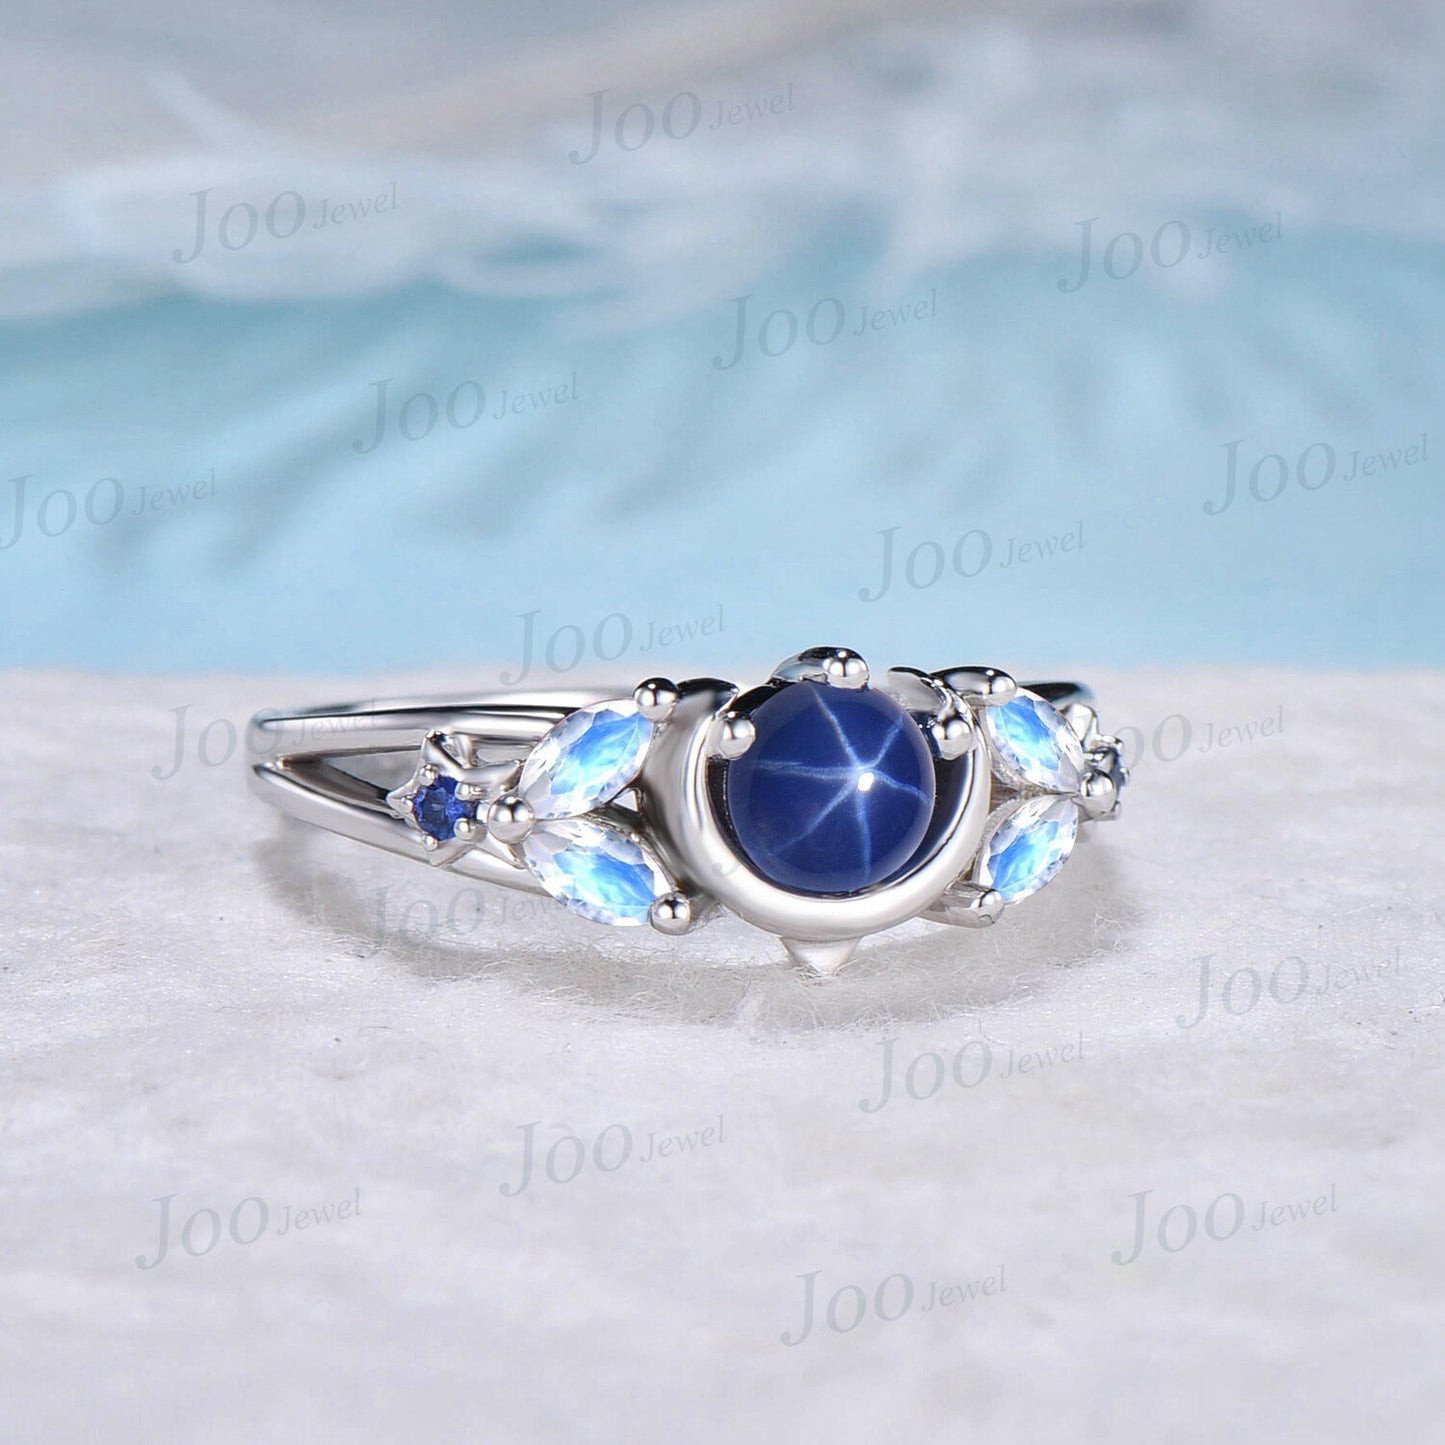 Unique Starry Sky Blue Star Sapphire Engagement Ring Star Moon Wedding Rings Platinum Moonstone Celestial Rings Half Moon Blue Sapphire Ring